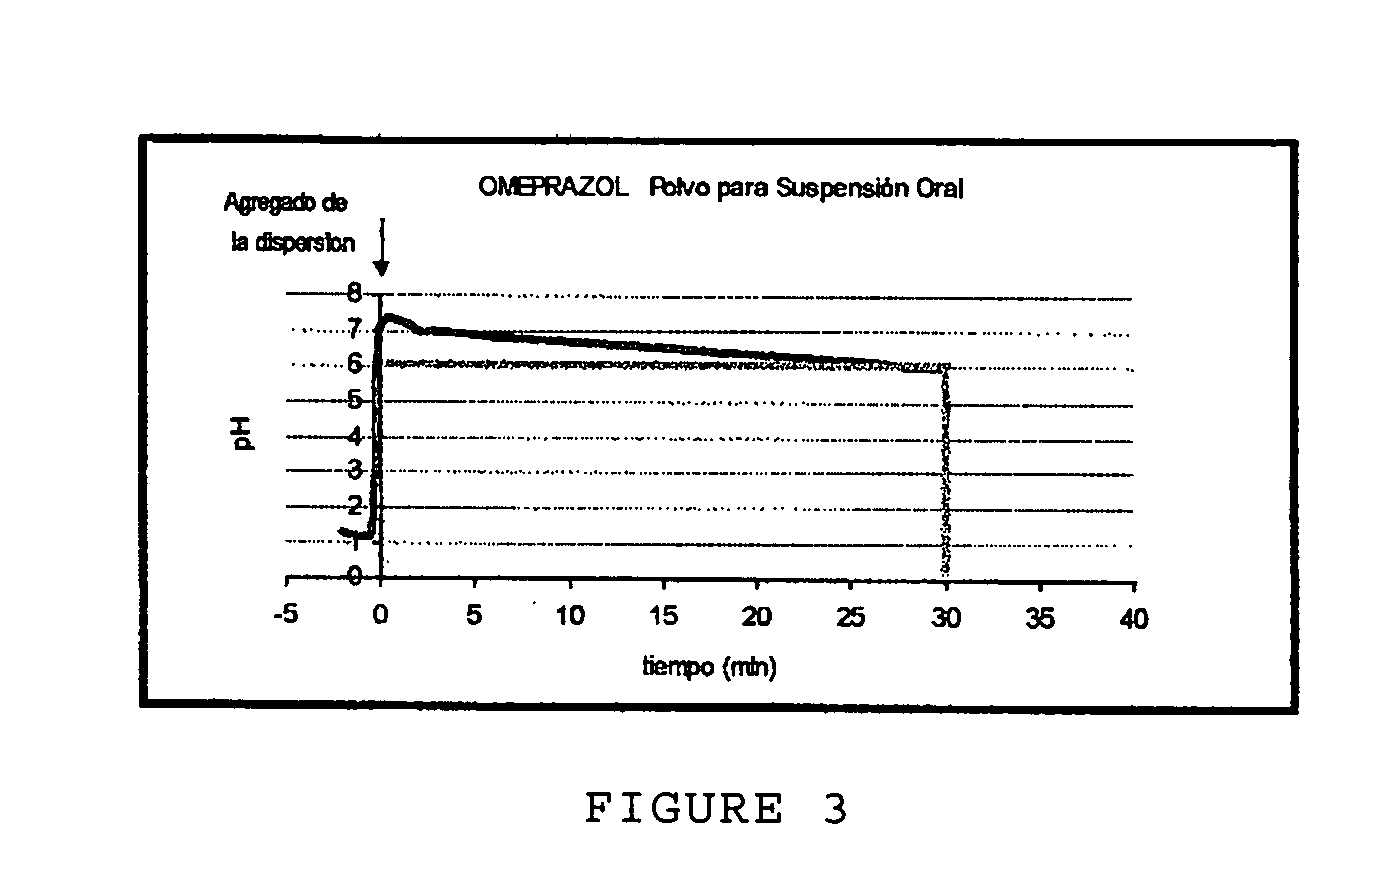 Anti-acid pharmaceutical composition in powder form and process for making it